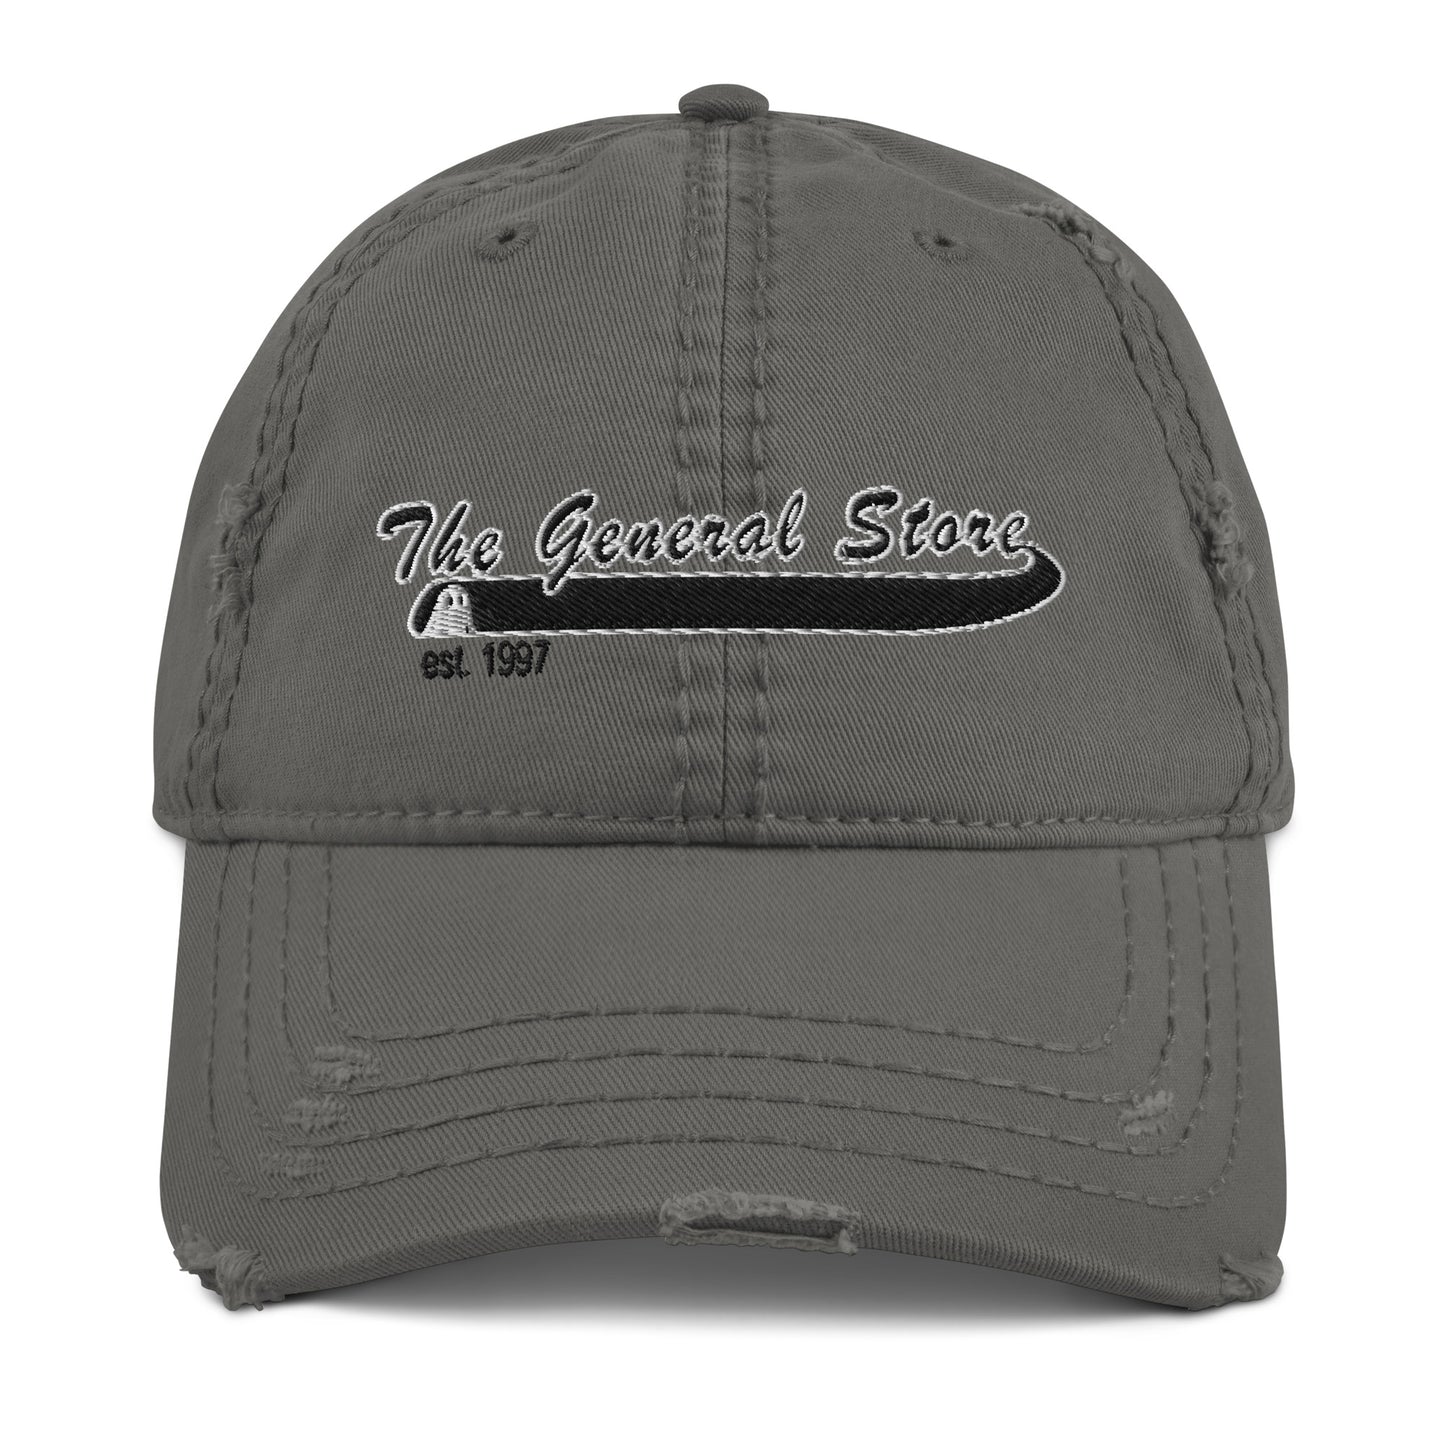 The General Store Varsity Embroidered Adjustable Distressed Hat